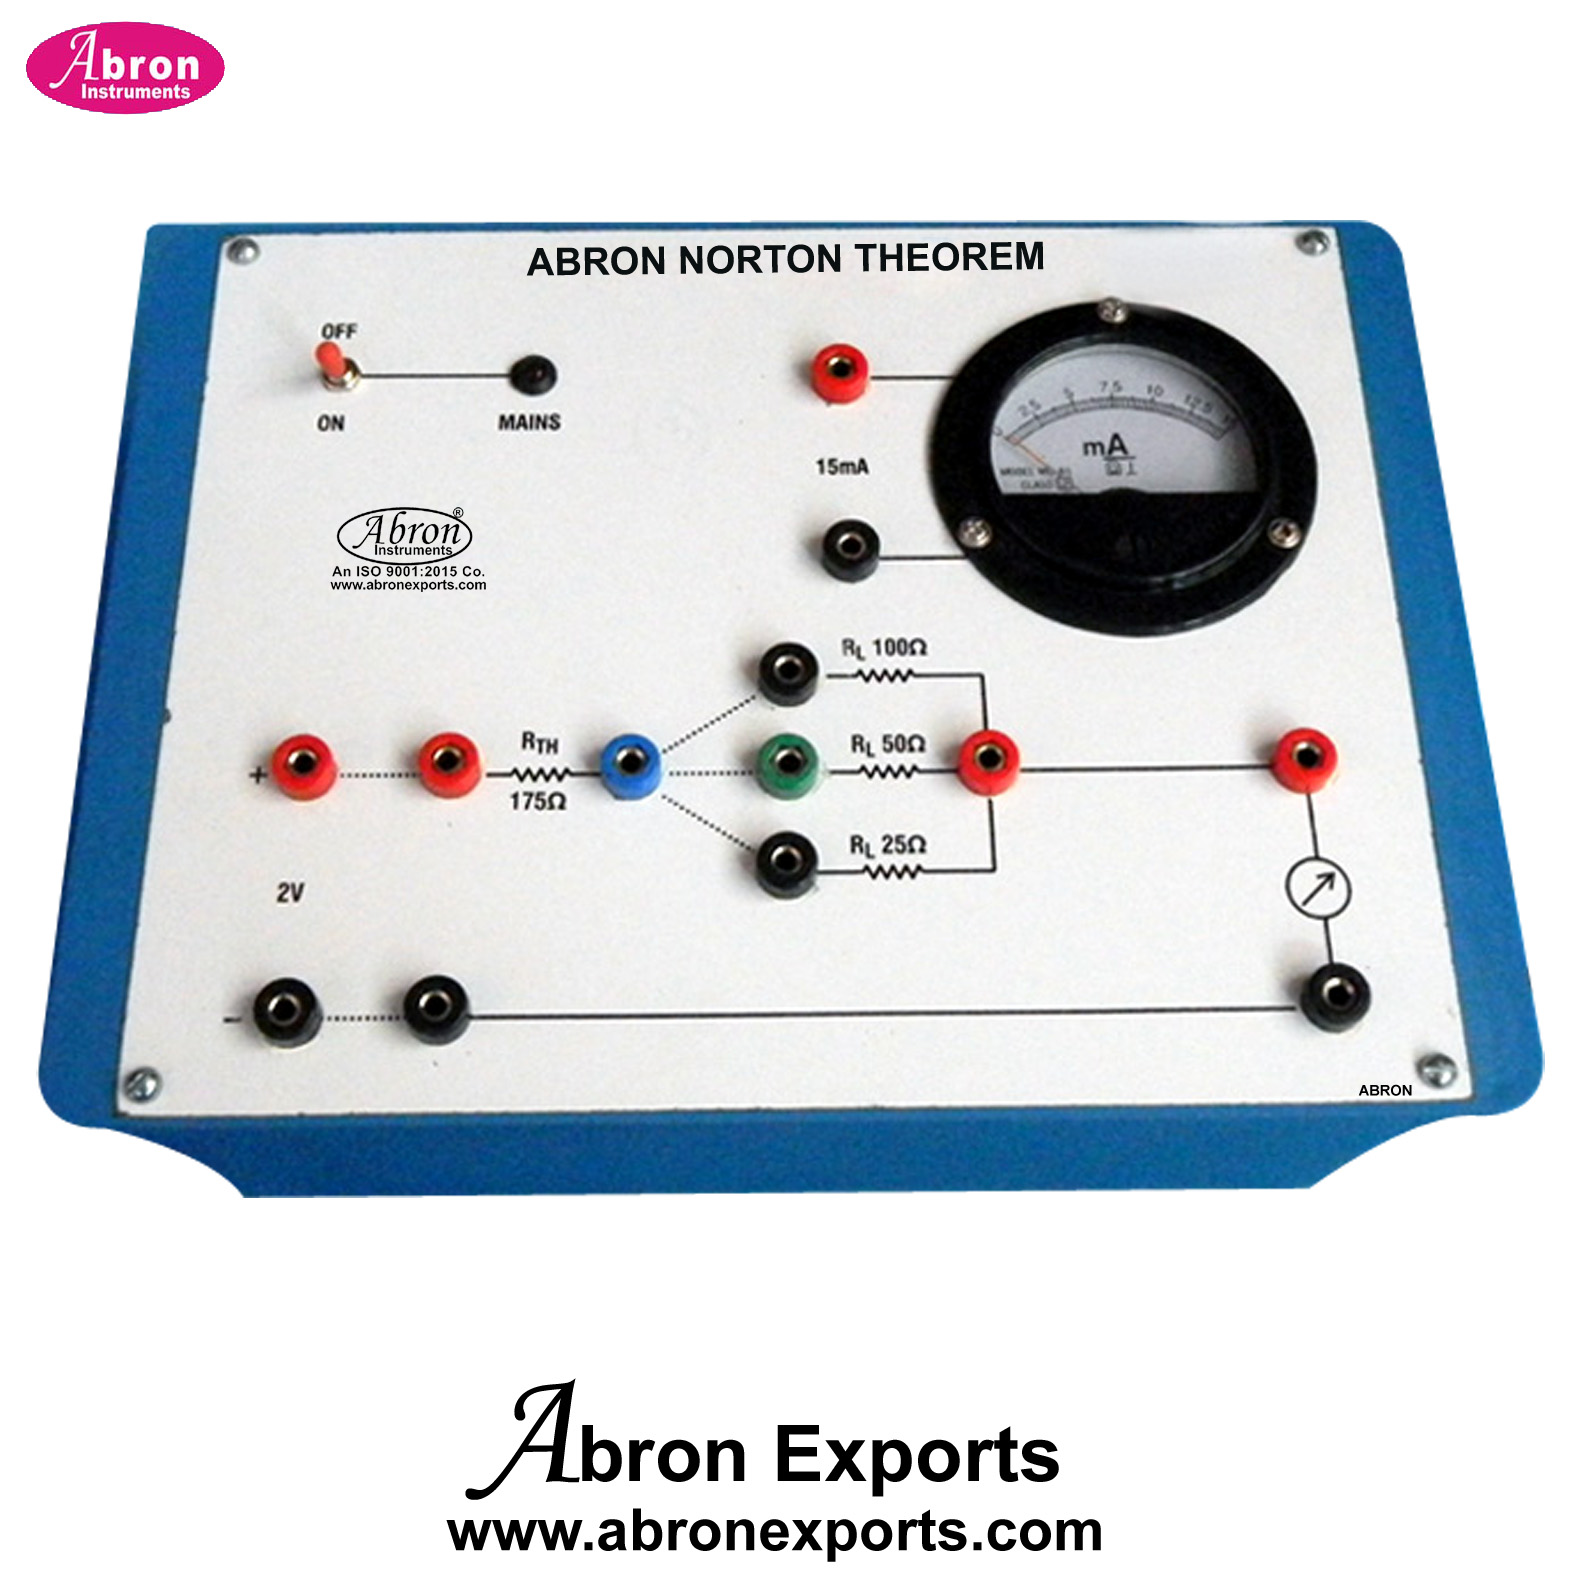 Study Theorem Nortons Theorem With Power Supply 1 Meter Electronic Trainer Kit Abron AE-1430NO1 